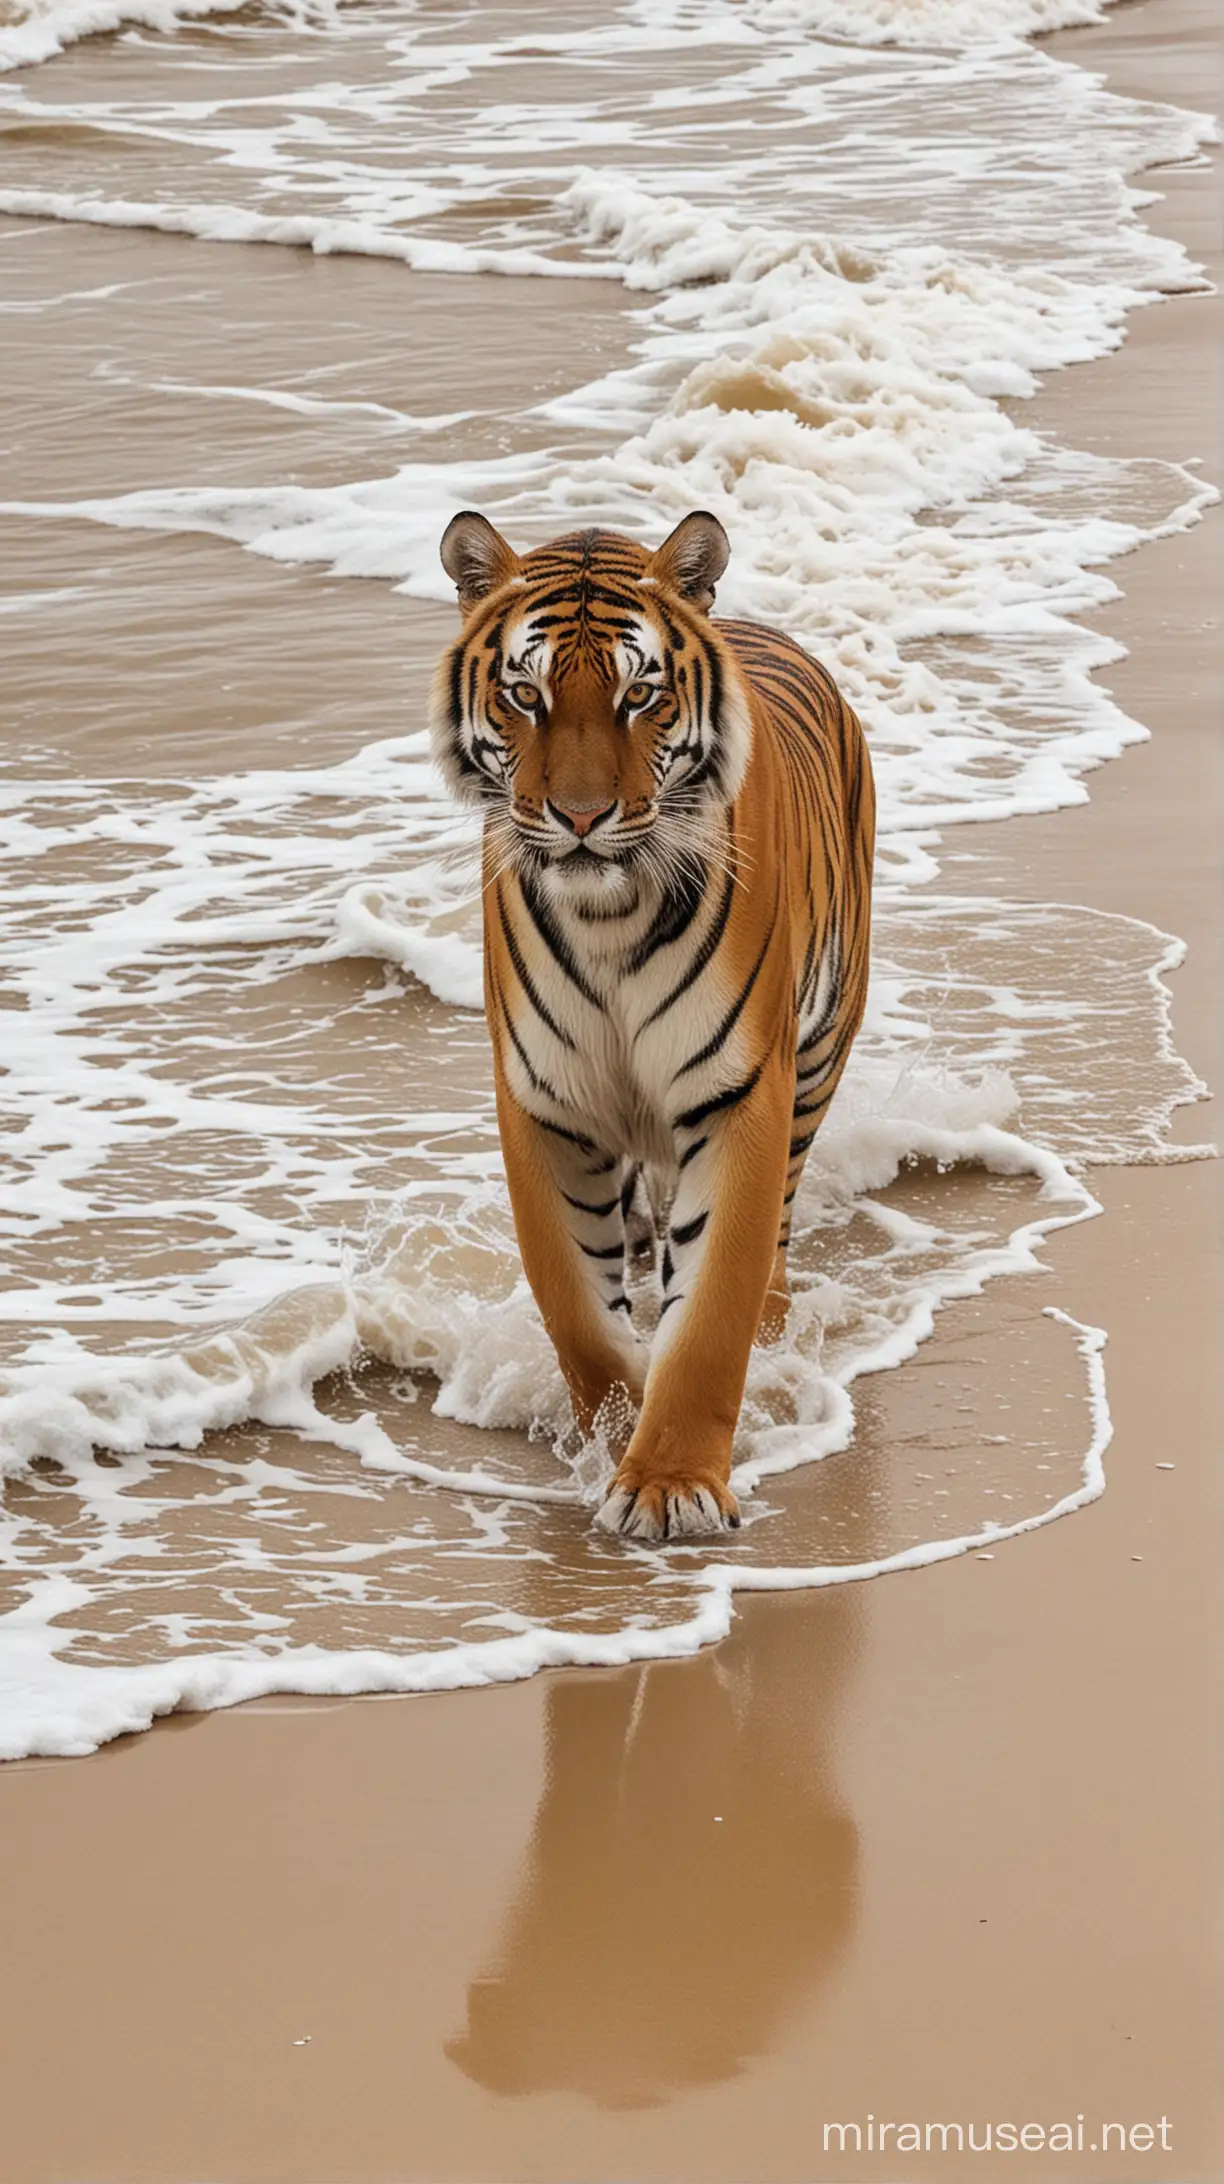 Tiger Encounter on the Beach with Spectators and Crashing Waves